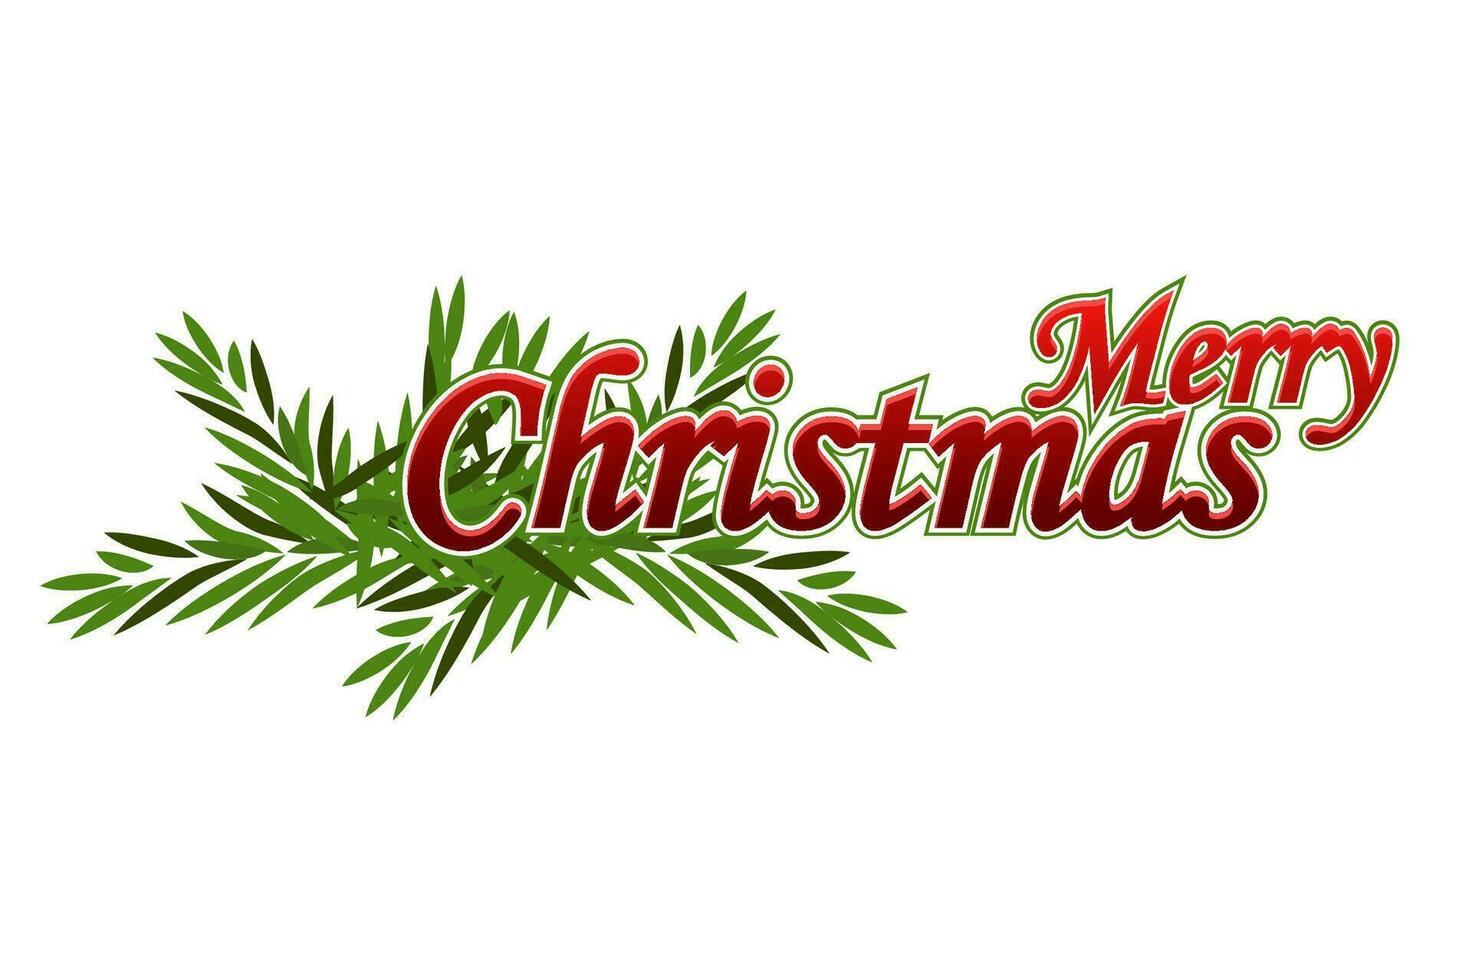 Merry Christmas red text with tree branch. Vector holiday illustration element